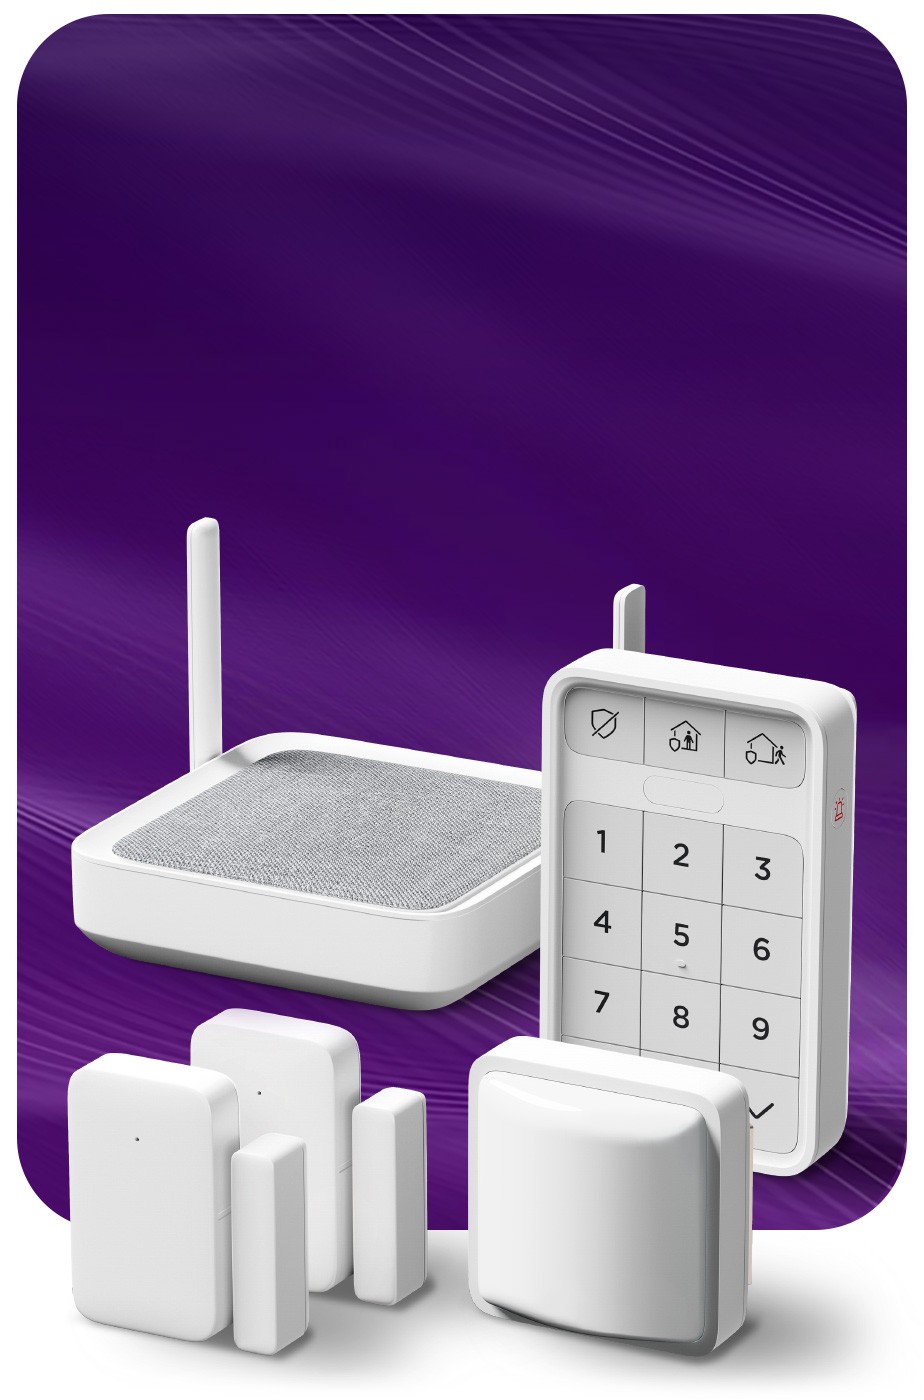 Roku Indoor Smart Plug SE Control Your Home from Anywhere with App - 2 PACK  for sale online